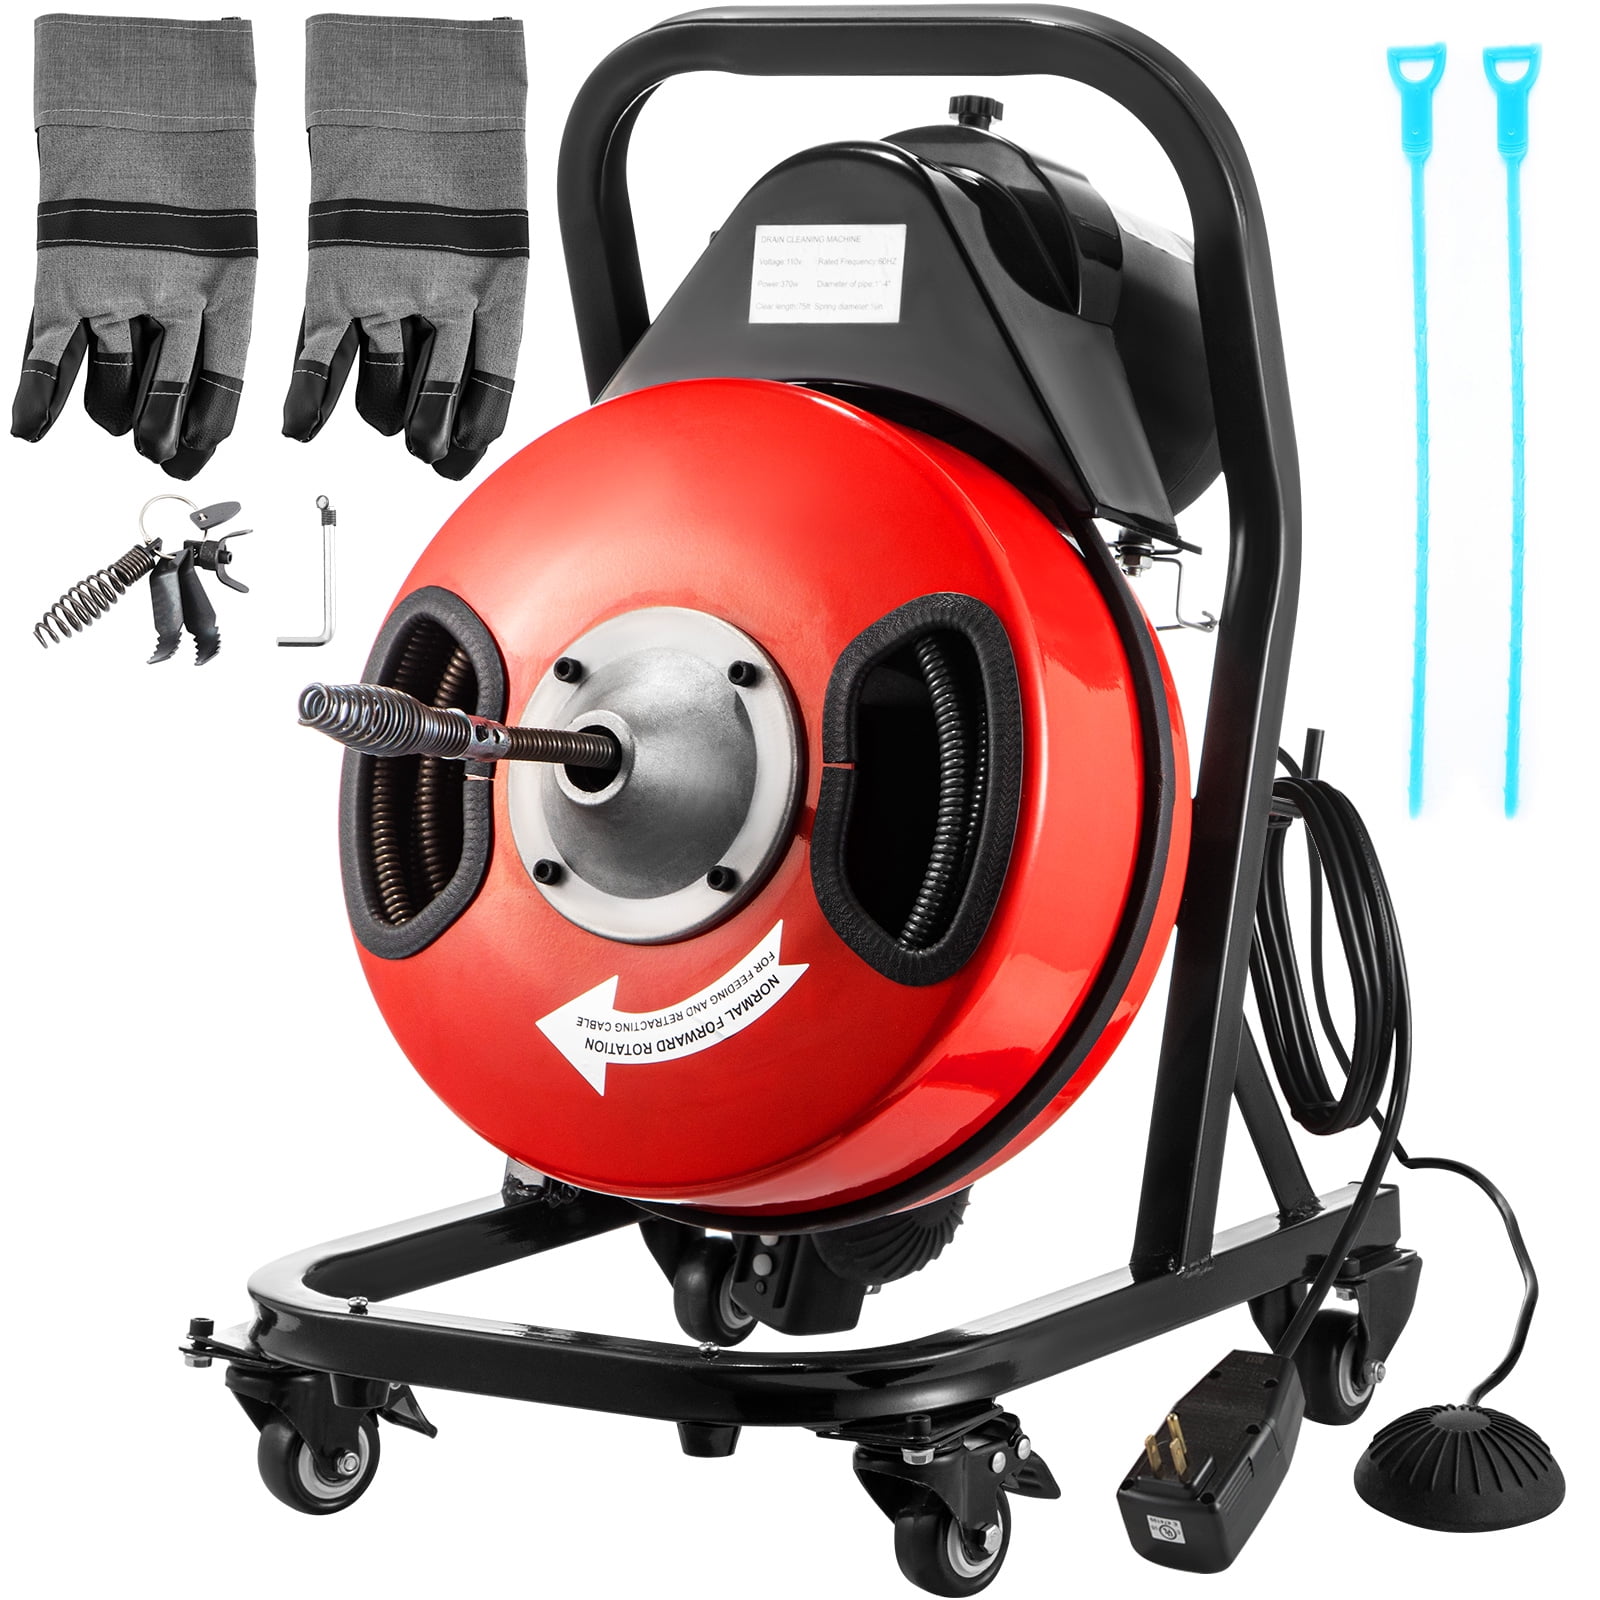 50ft Commercial Drain Cleaner 3/8" Cleaning Machine Snake Sewer Plumbing Tool for sale online 